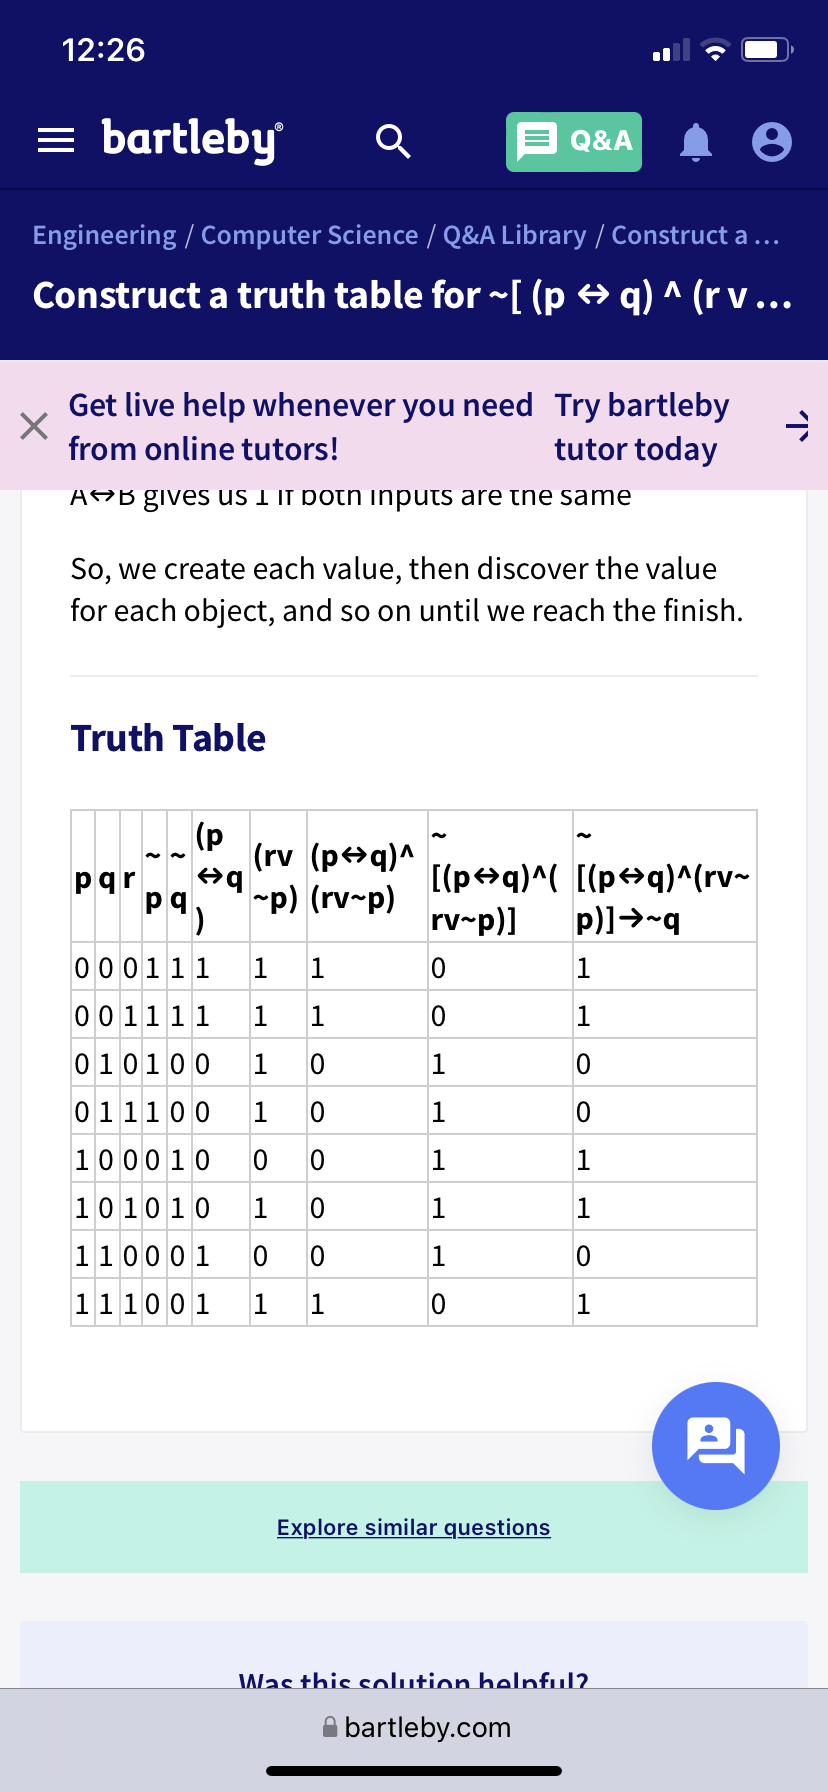 12:26
= bartleby
Q&A
Engineering / Computer Science / Q&A Library /
| Construct a ...
Construct a truth table for ~[ (p → q) ^ (r v ...
Get live help whenever you need Try bartleby
tutor today
from online tutors!
ARB gives us I if poth inputs are tne same
So, we create each value, then discover the value
for each object, and so on until we reach the finish.
Truth Table
(p
(rv (p+q)^
"p) (rv-p)
[(p+q)^( [(p+q)^(rv~
rv-p)]
pqr
pq
p)]→-q
000111
1
1
001111
1
1
010100
011100
100010
1
101010
1
1
1
110001
1
111001
1
1
1
Explore similar questions
Was this solution belnful?.
A bartleby.com
